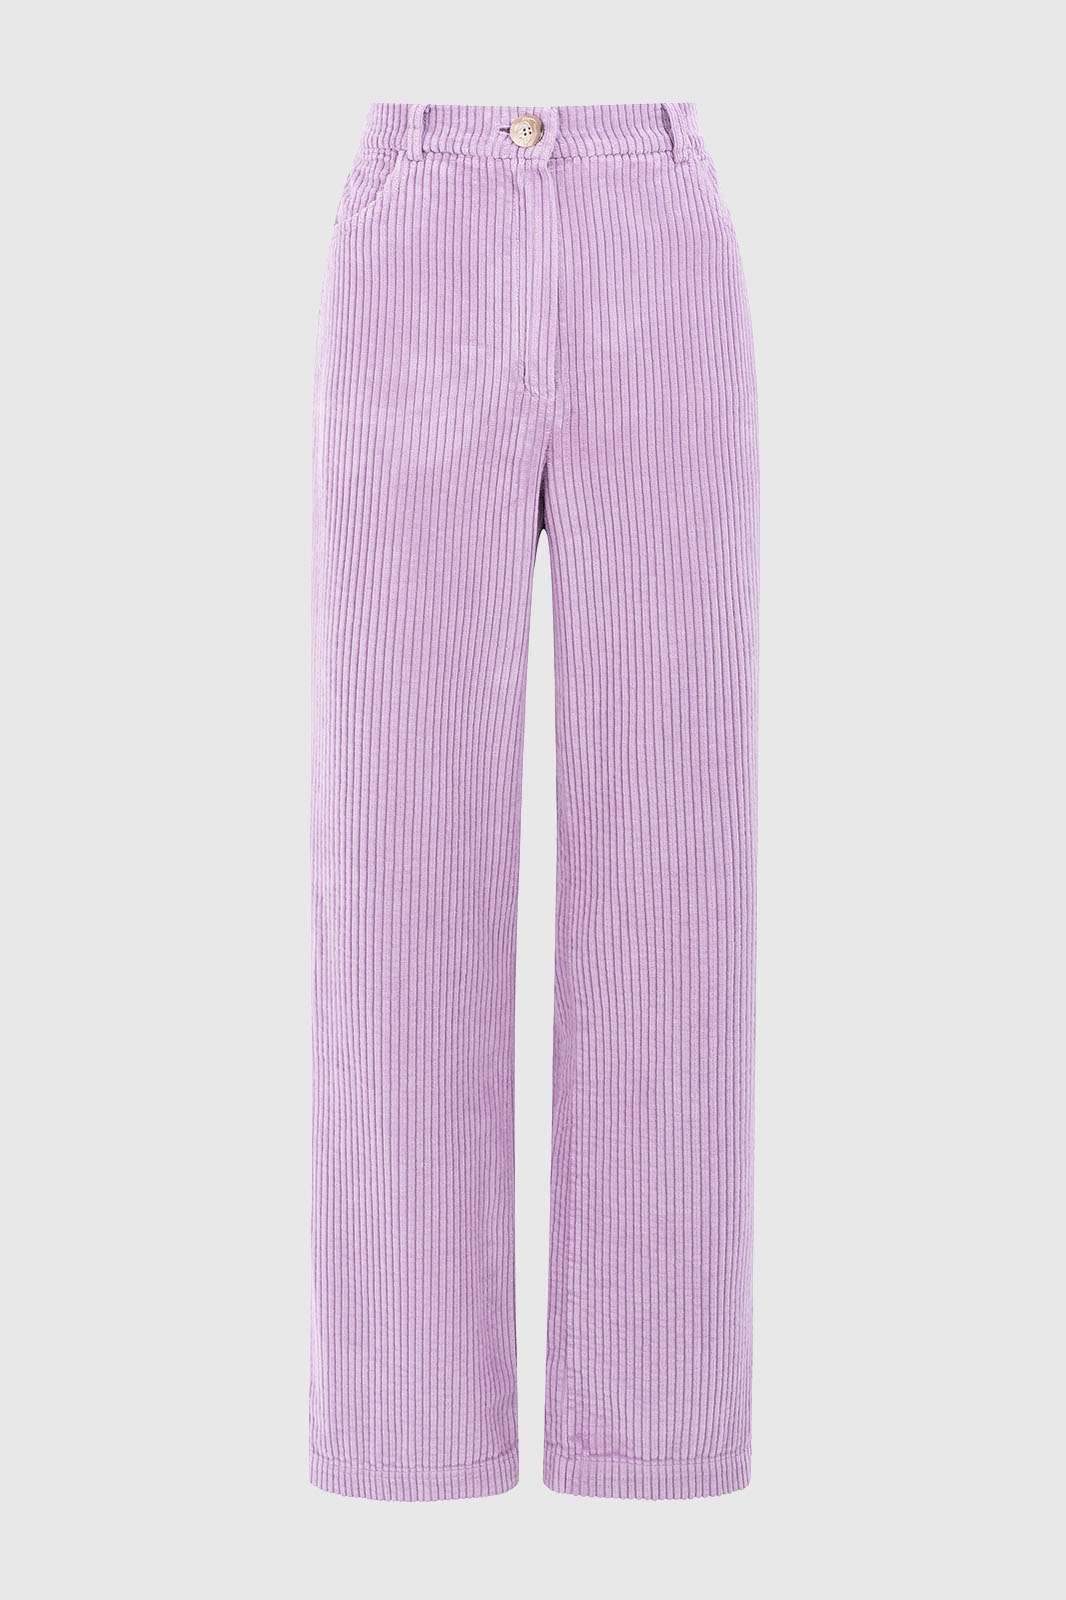 Naz women's corduroy high-waisted winter trousers made from 100% cotton.